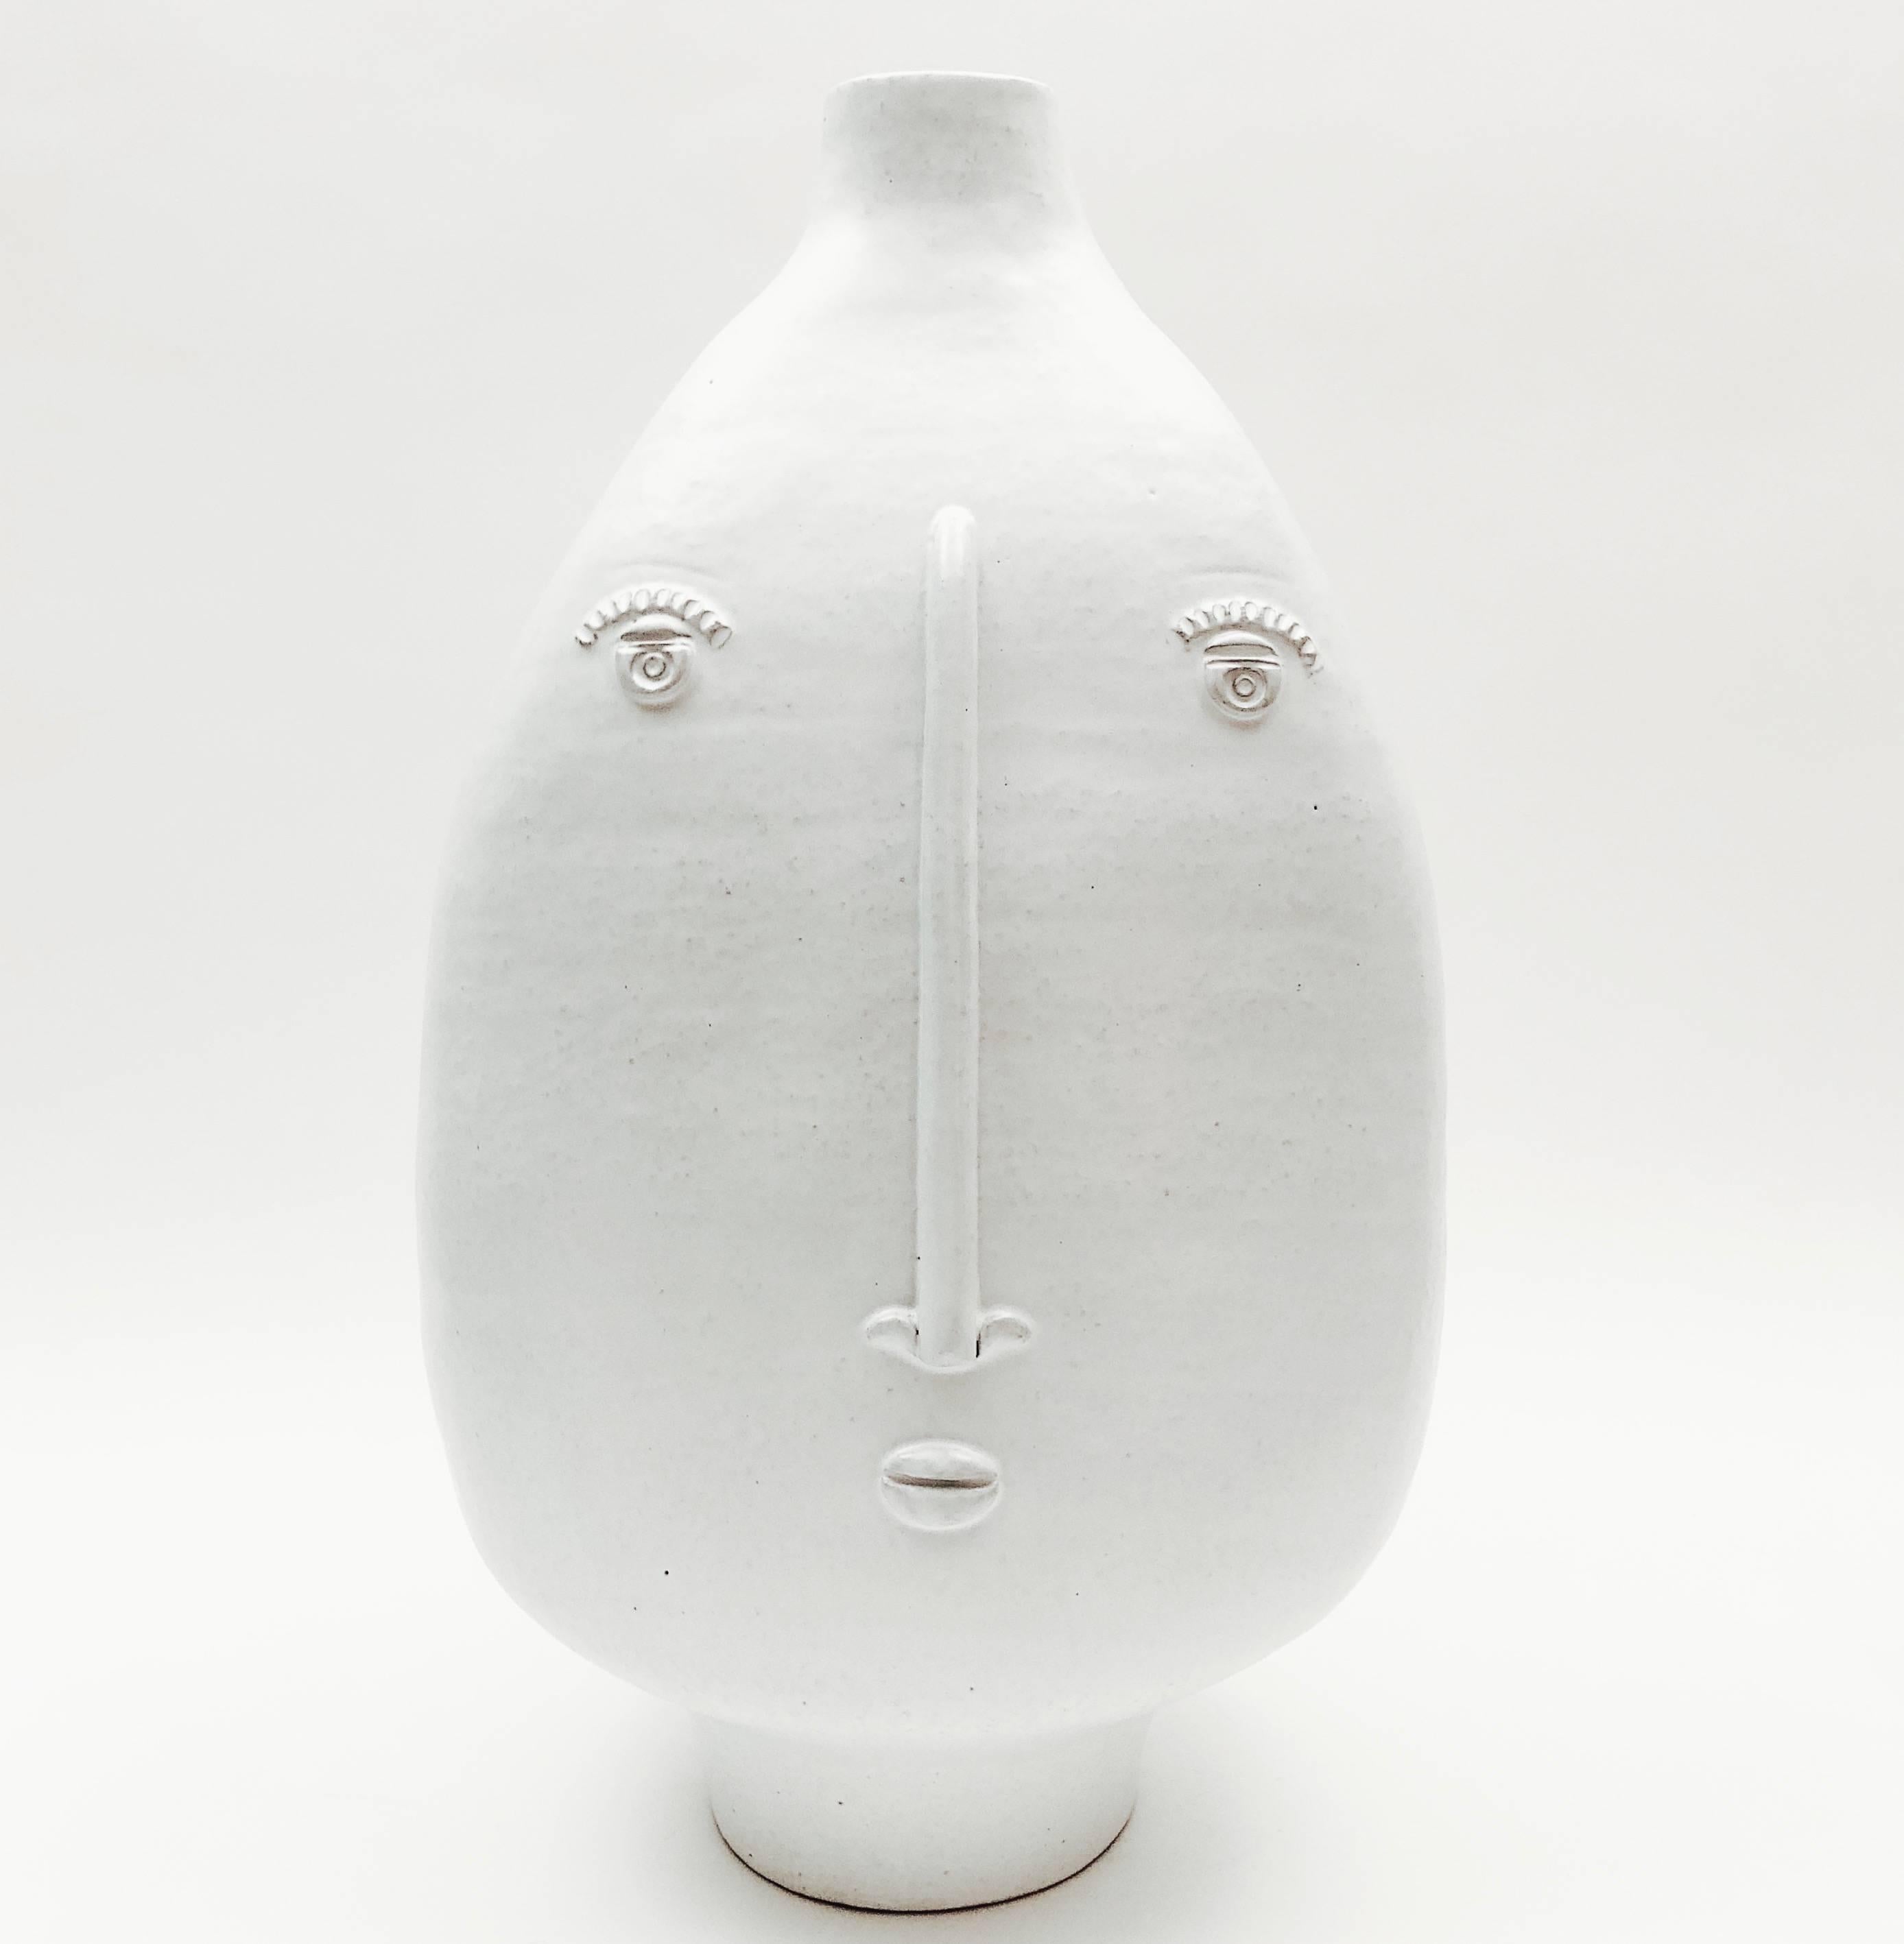 Large sculptural and organic ceramic piece forming lamp-base, textured stoneware glazed in milky white, and decorated with two stylized visages front and back. 
One of a kind handmade piece signed by the French ceramicists, DaLo. 

Height